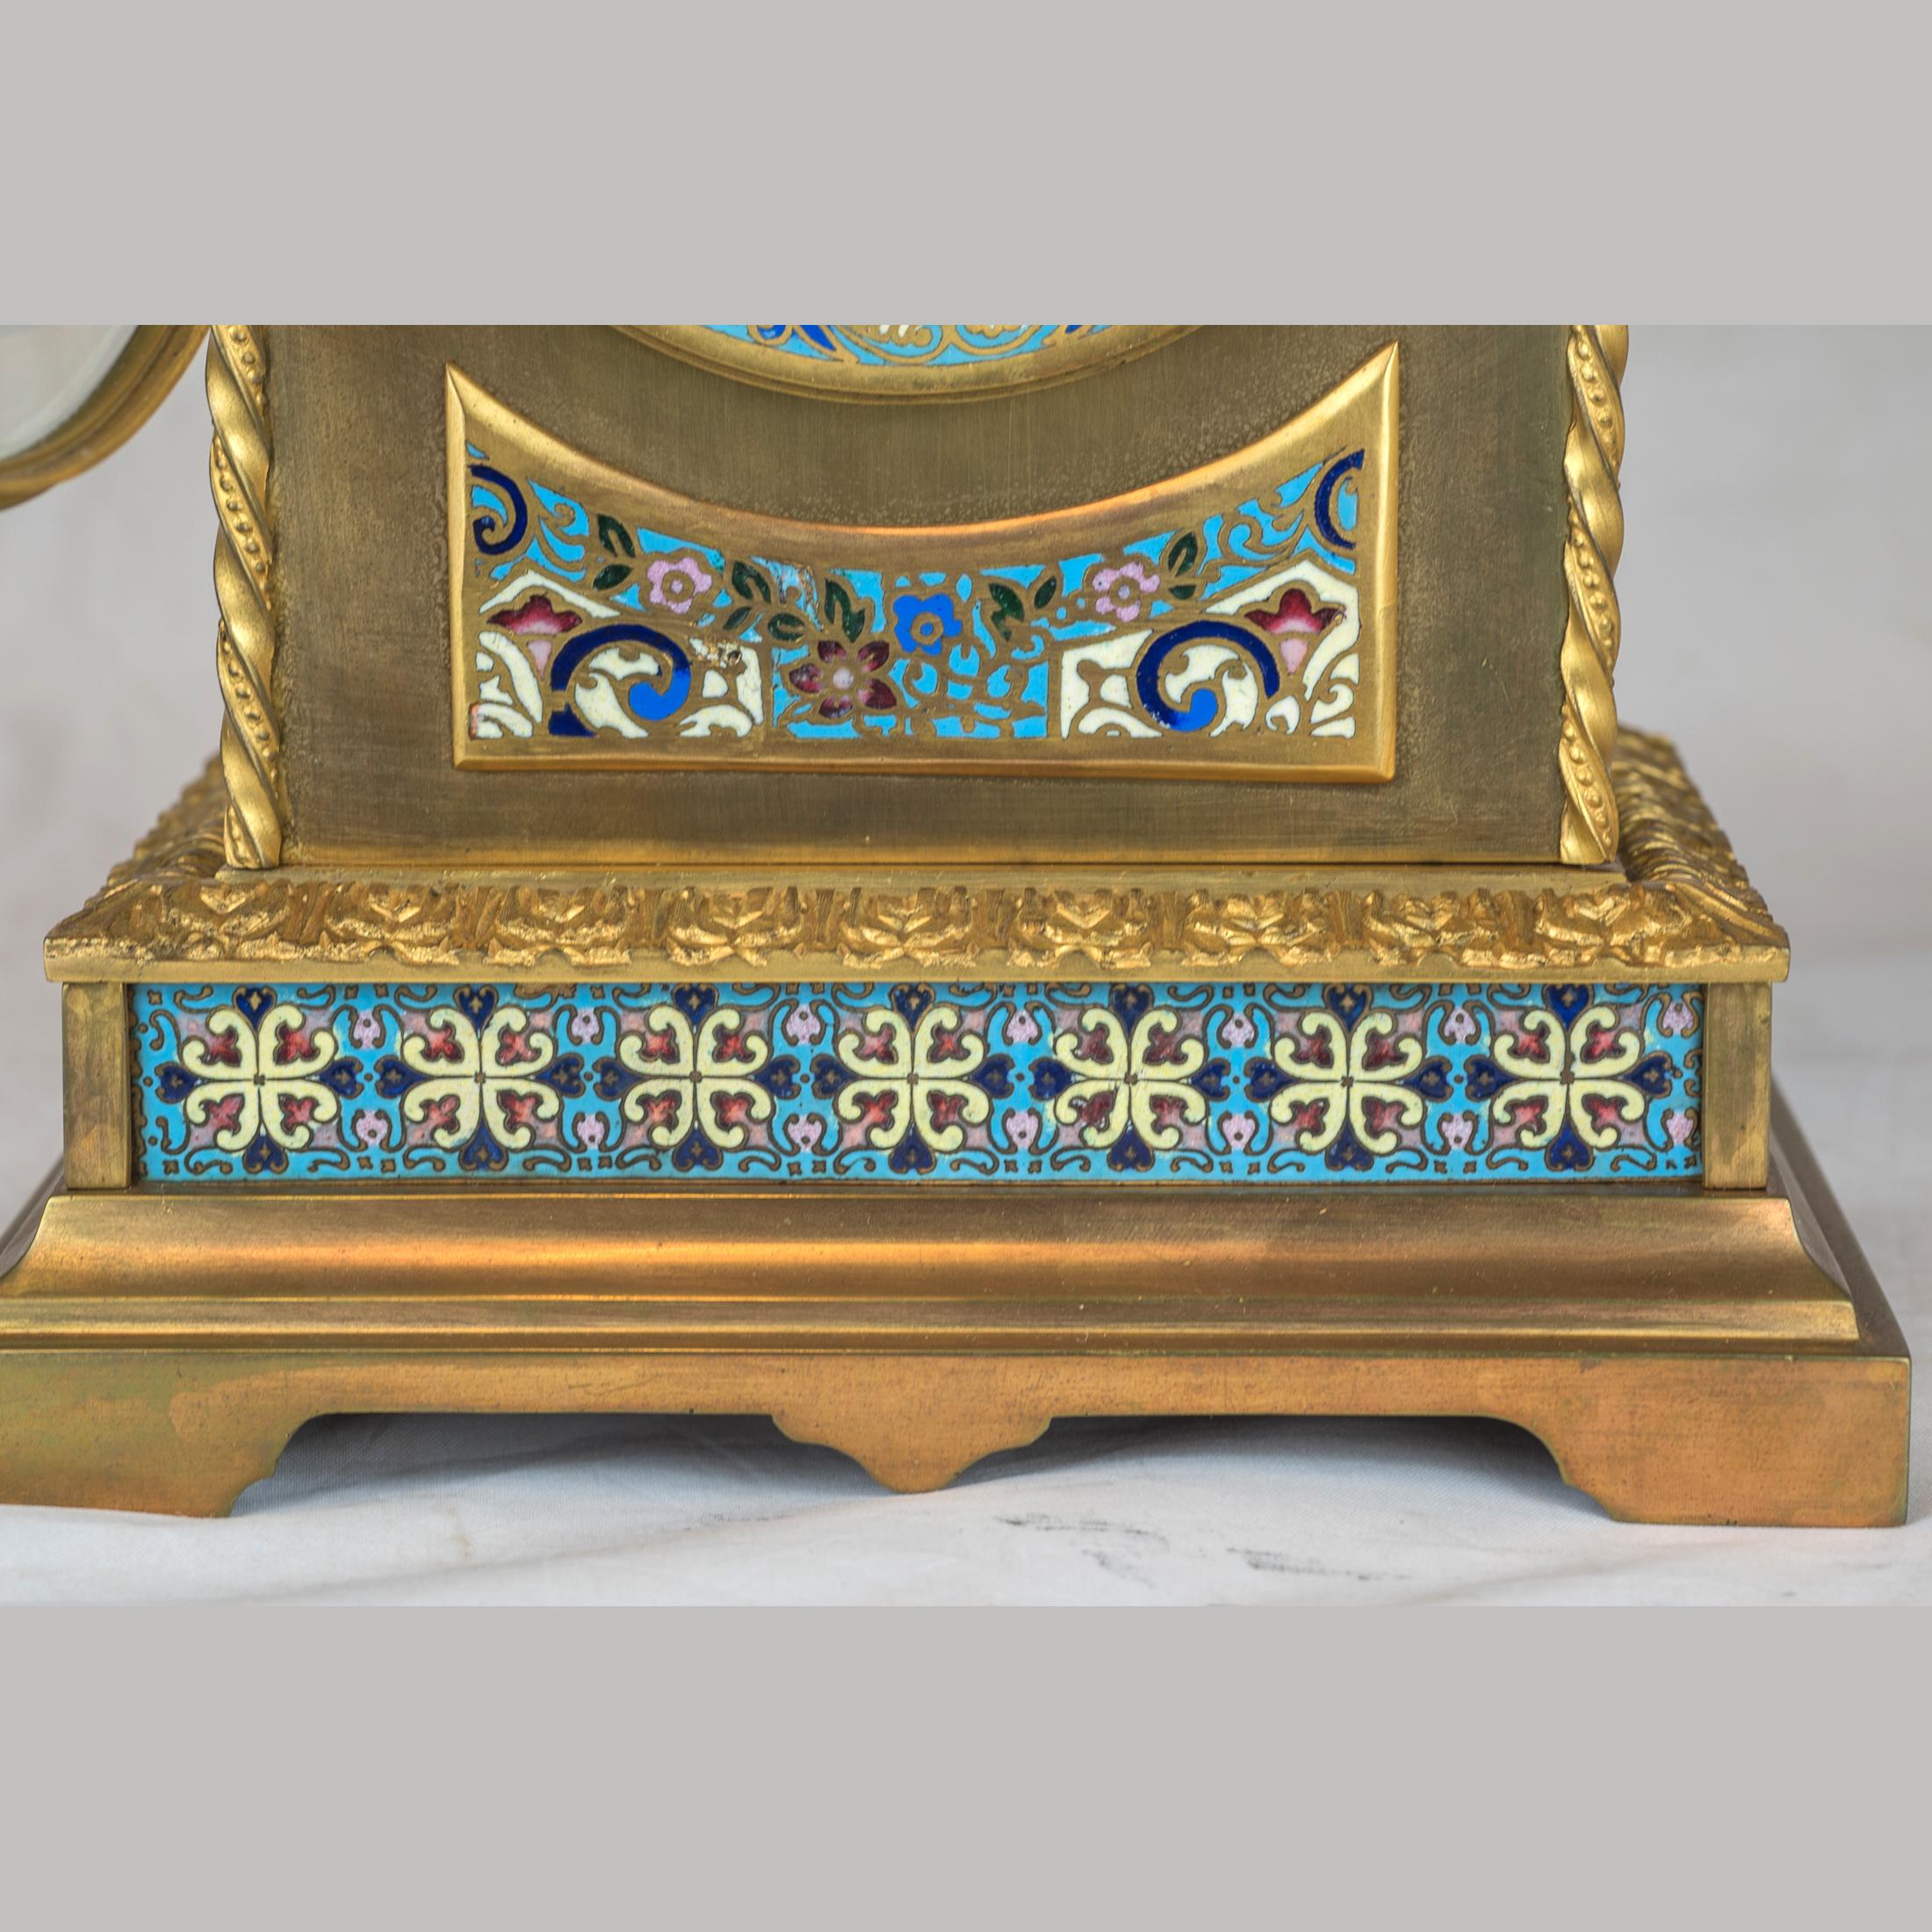 Fabulous Late 19th Century French Champleve Enamel and Gilt-Bronze Mantel Clock For Sale 4